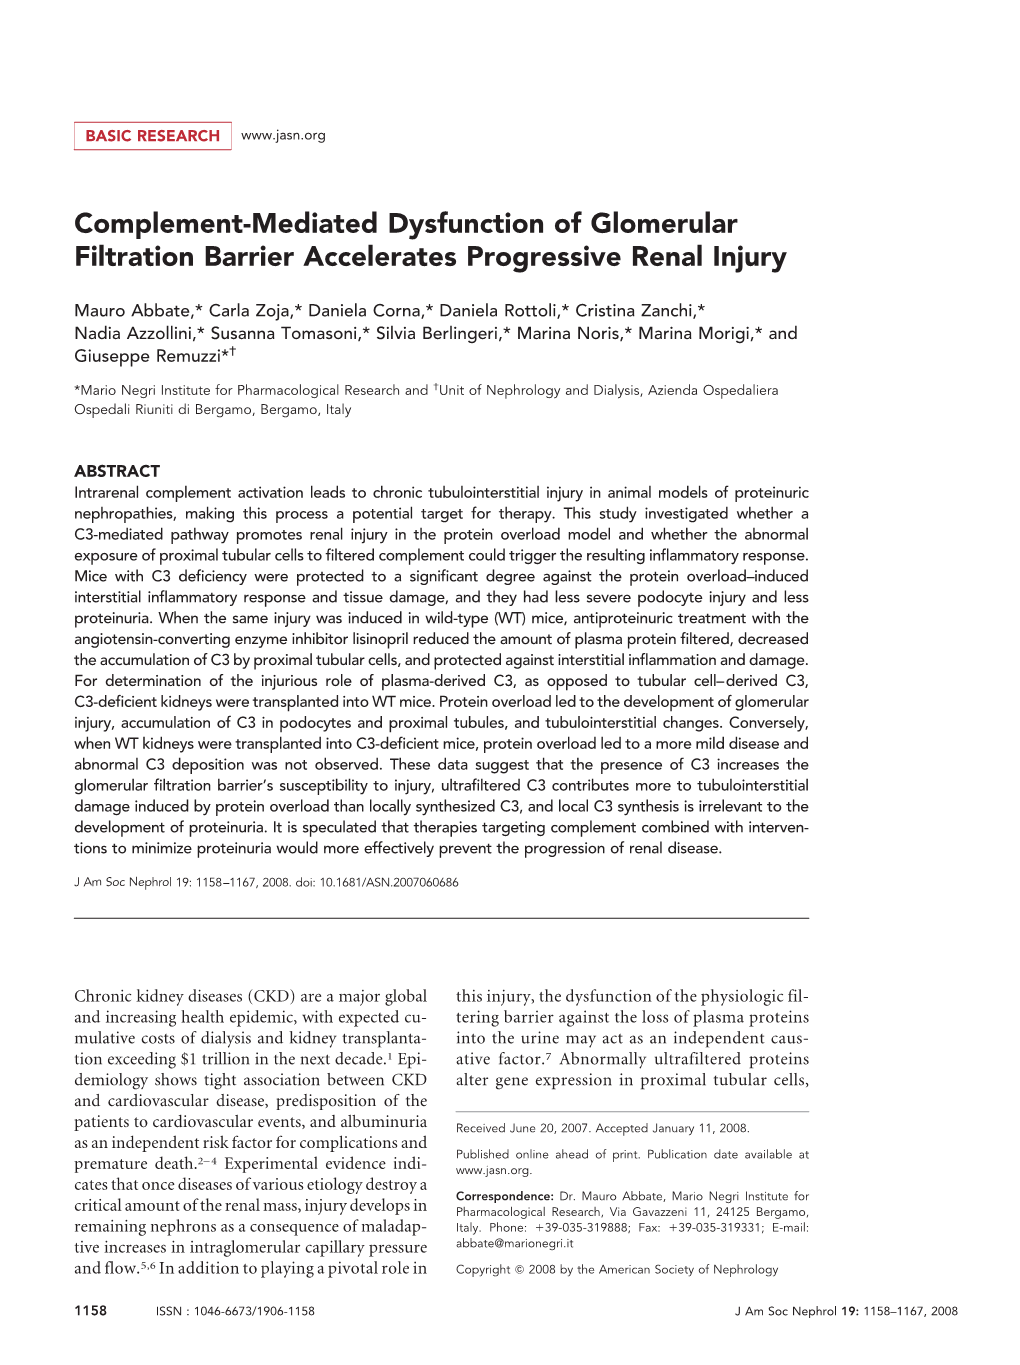 Complement-Mediated Dysfunction of Glomerular Filtration Barrier Accelerates Progressive Renal Injury